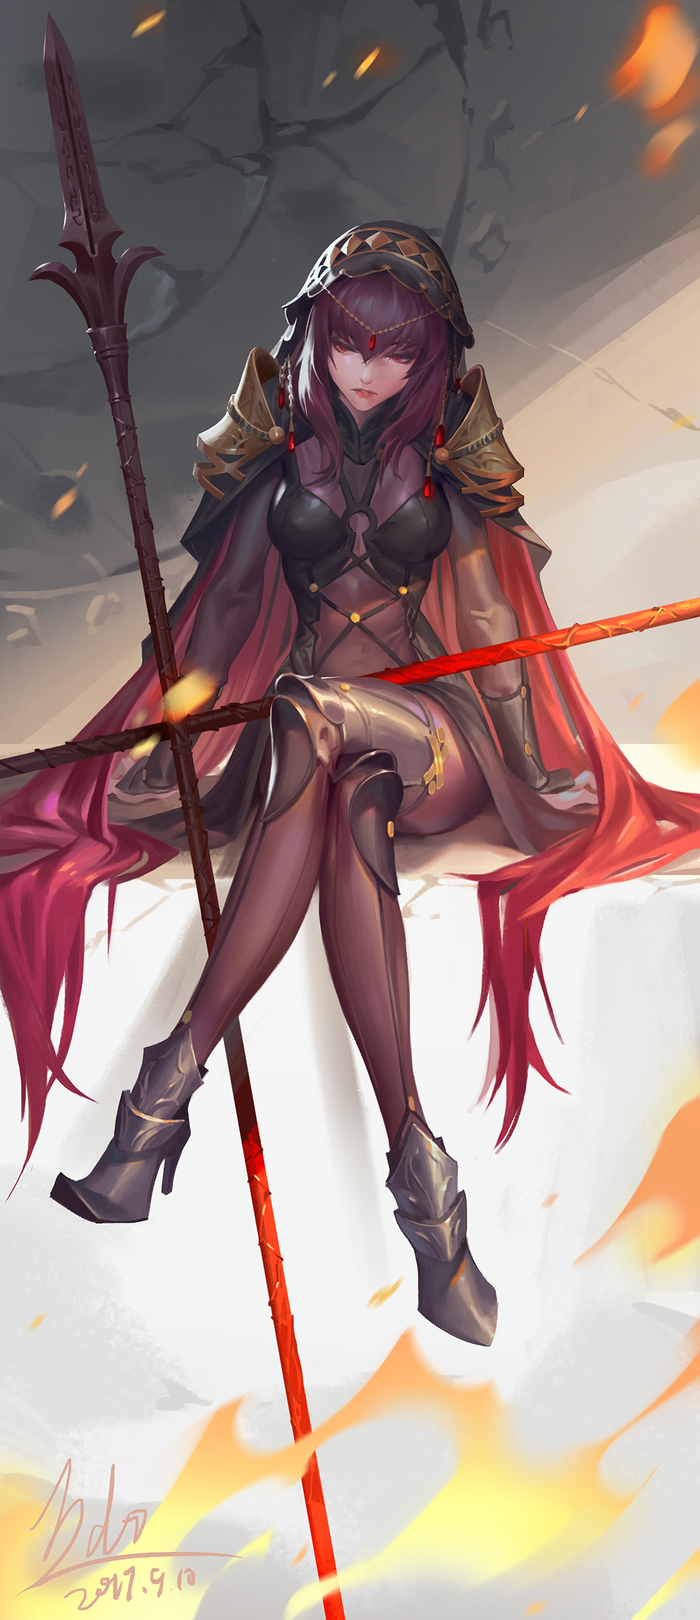 Scathach Anime Art, , Fate, Scathach, Hellsing7, 